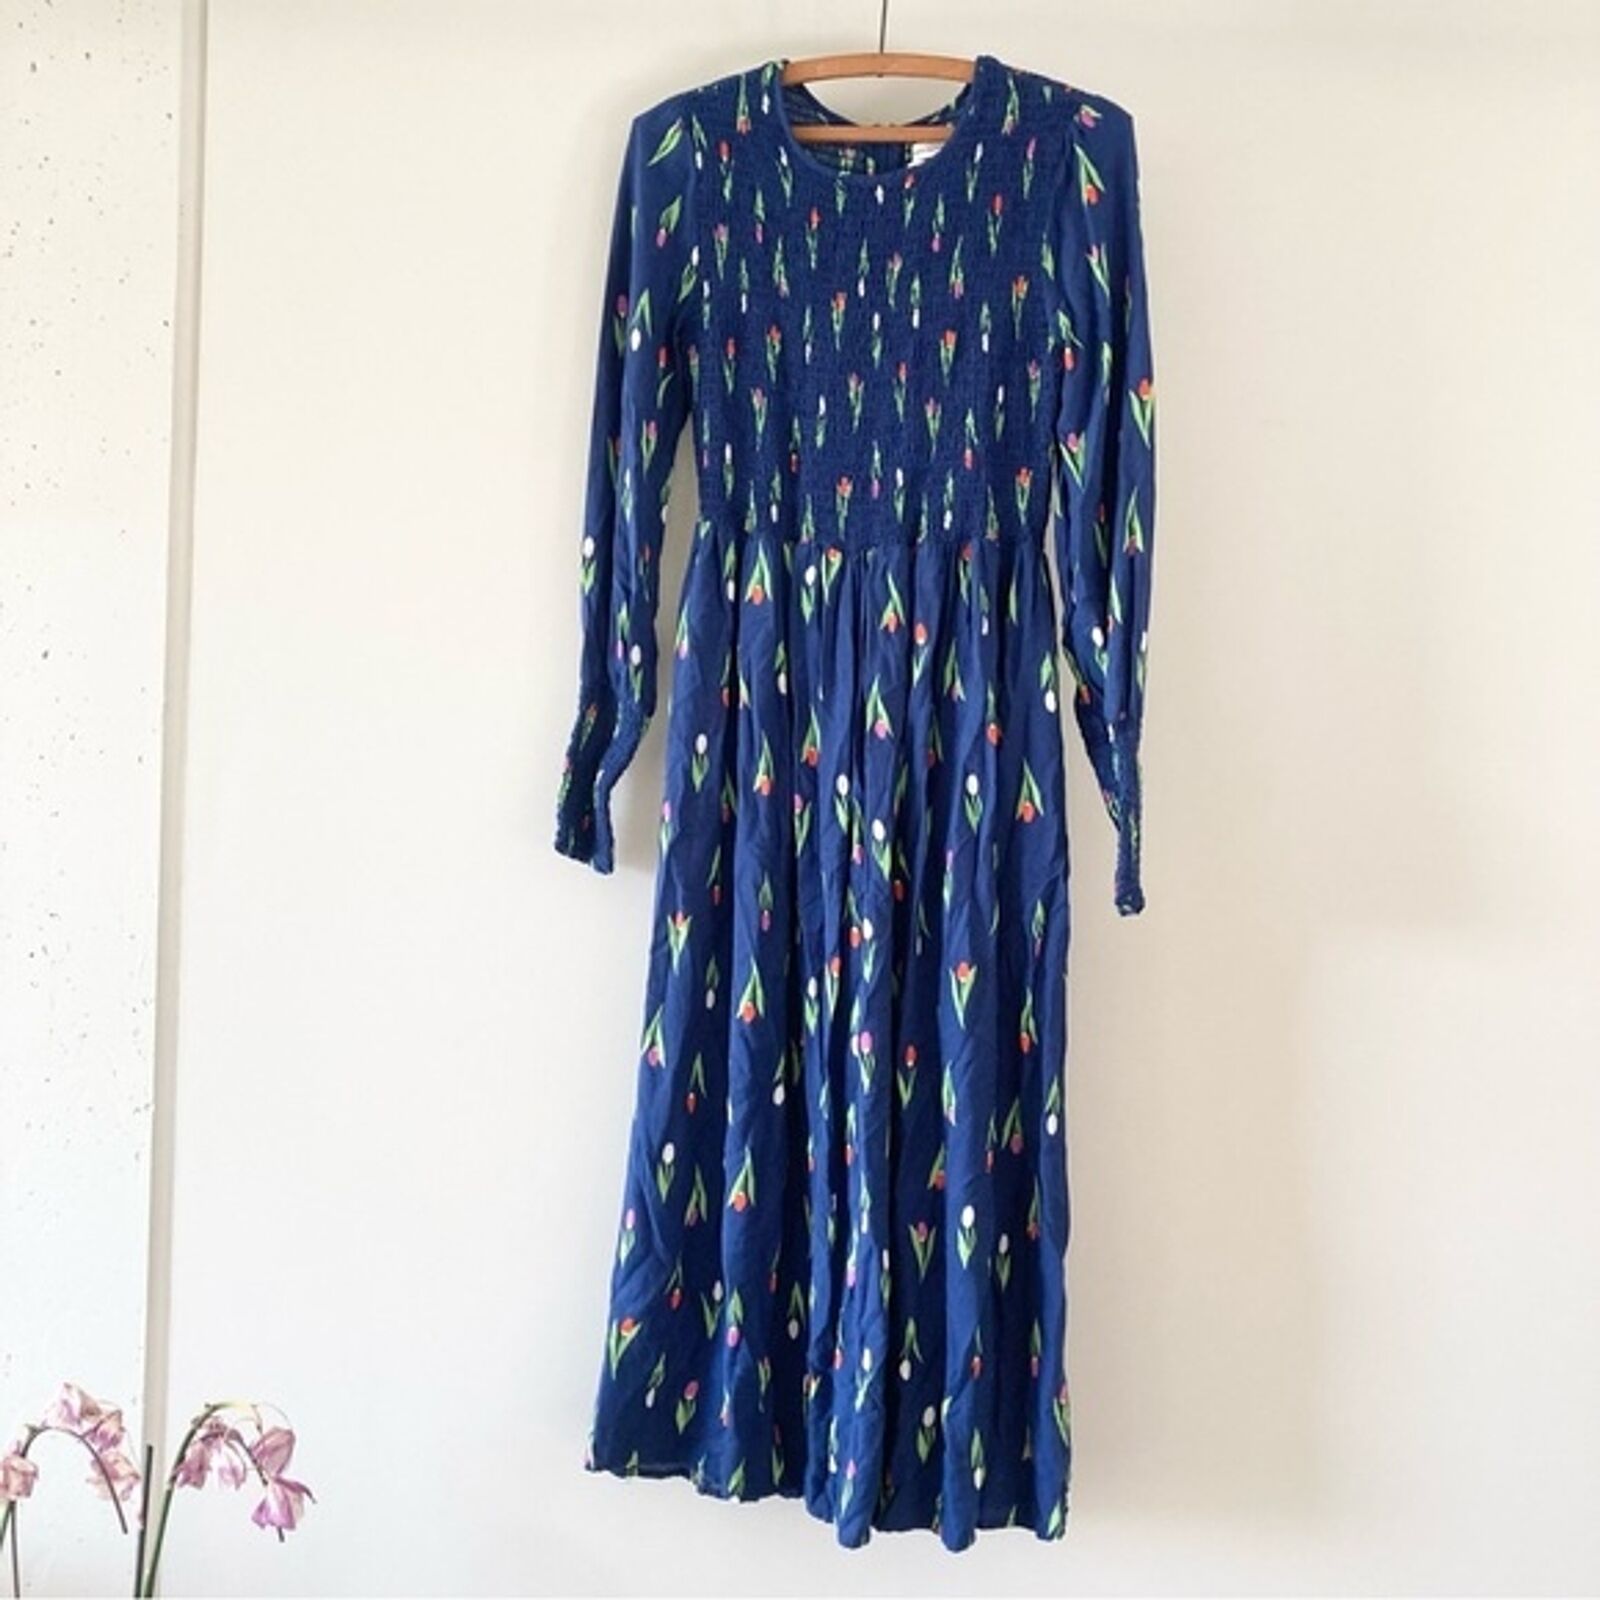 Urban Outfitters Smocked Tulip Navy Dress Small - image 4